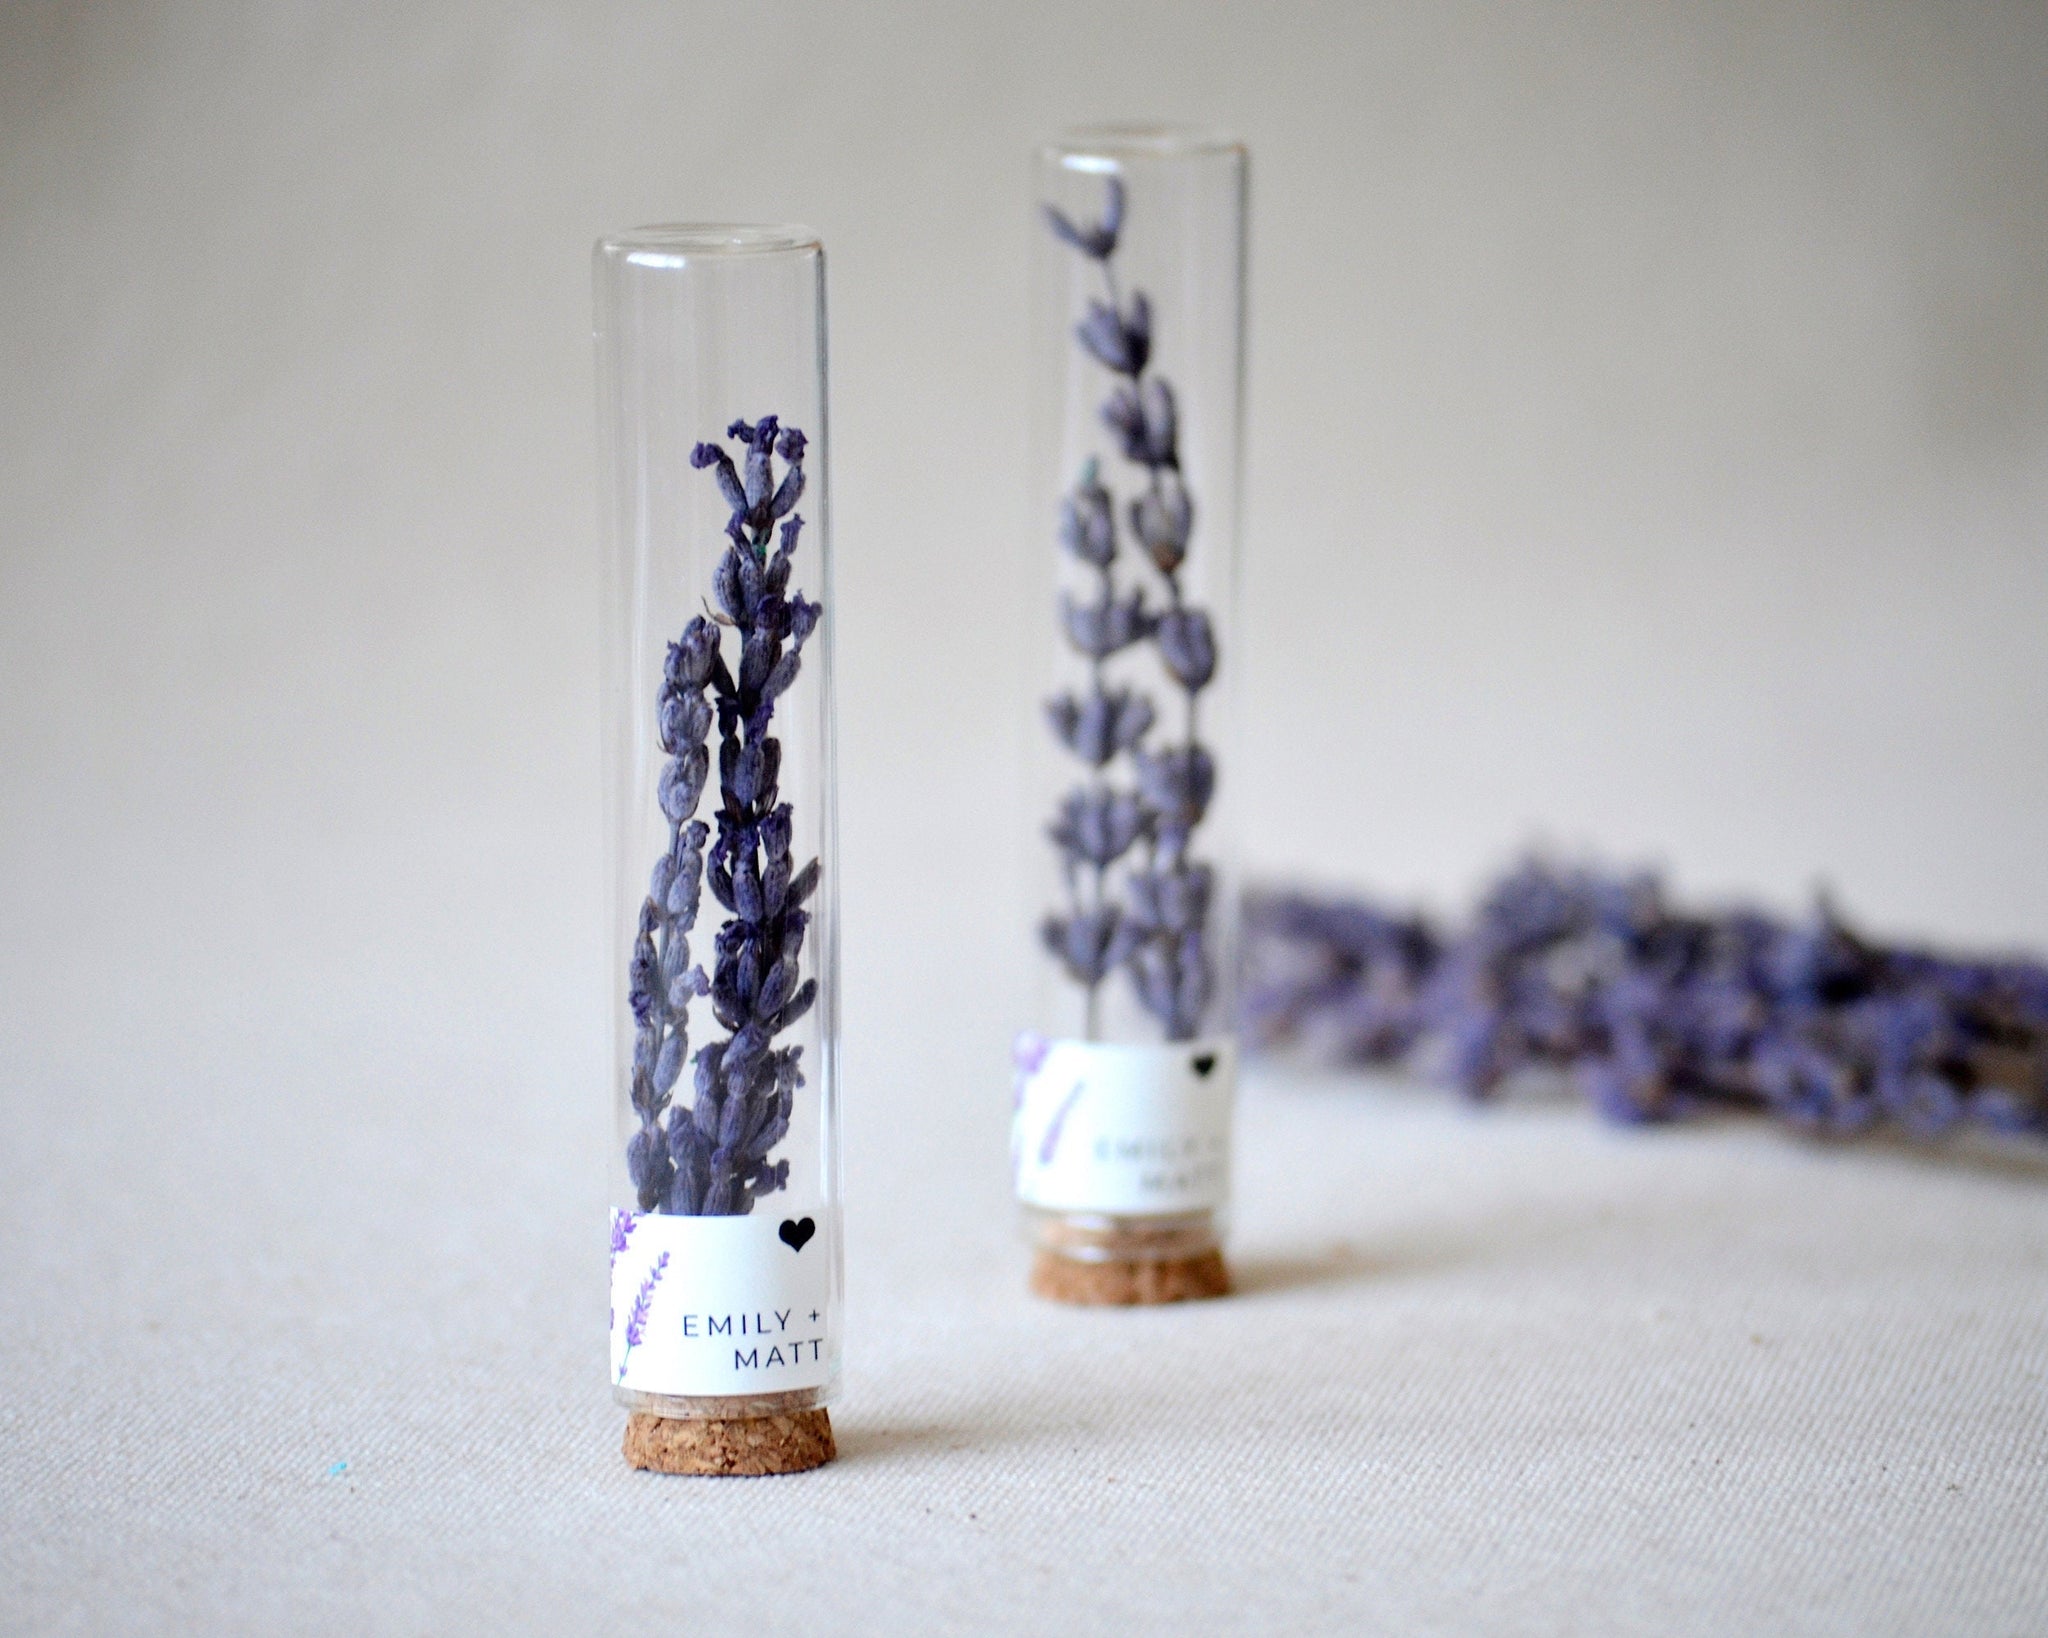 Lavender Wedding Favors, Dried Lavender Wedding Gift, Glass Test Tube Favors, Rustic Favors For Guests, Boho Wedding, Beach Wedding Favors